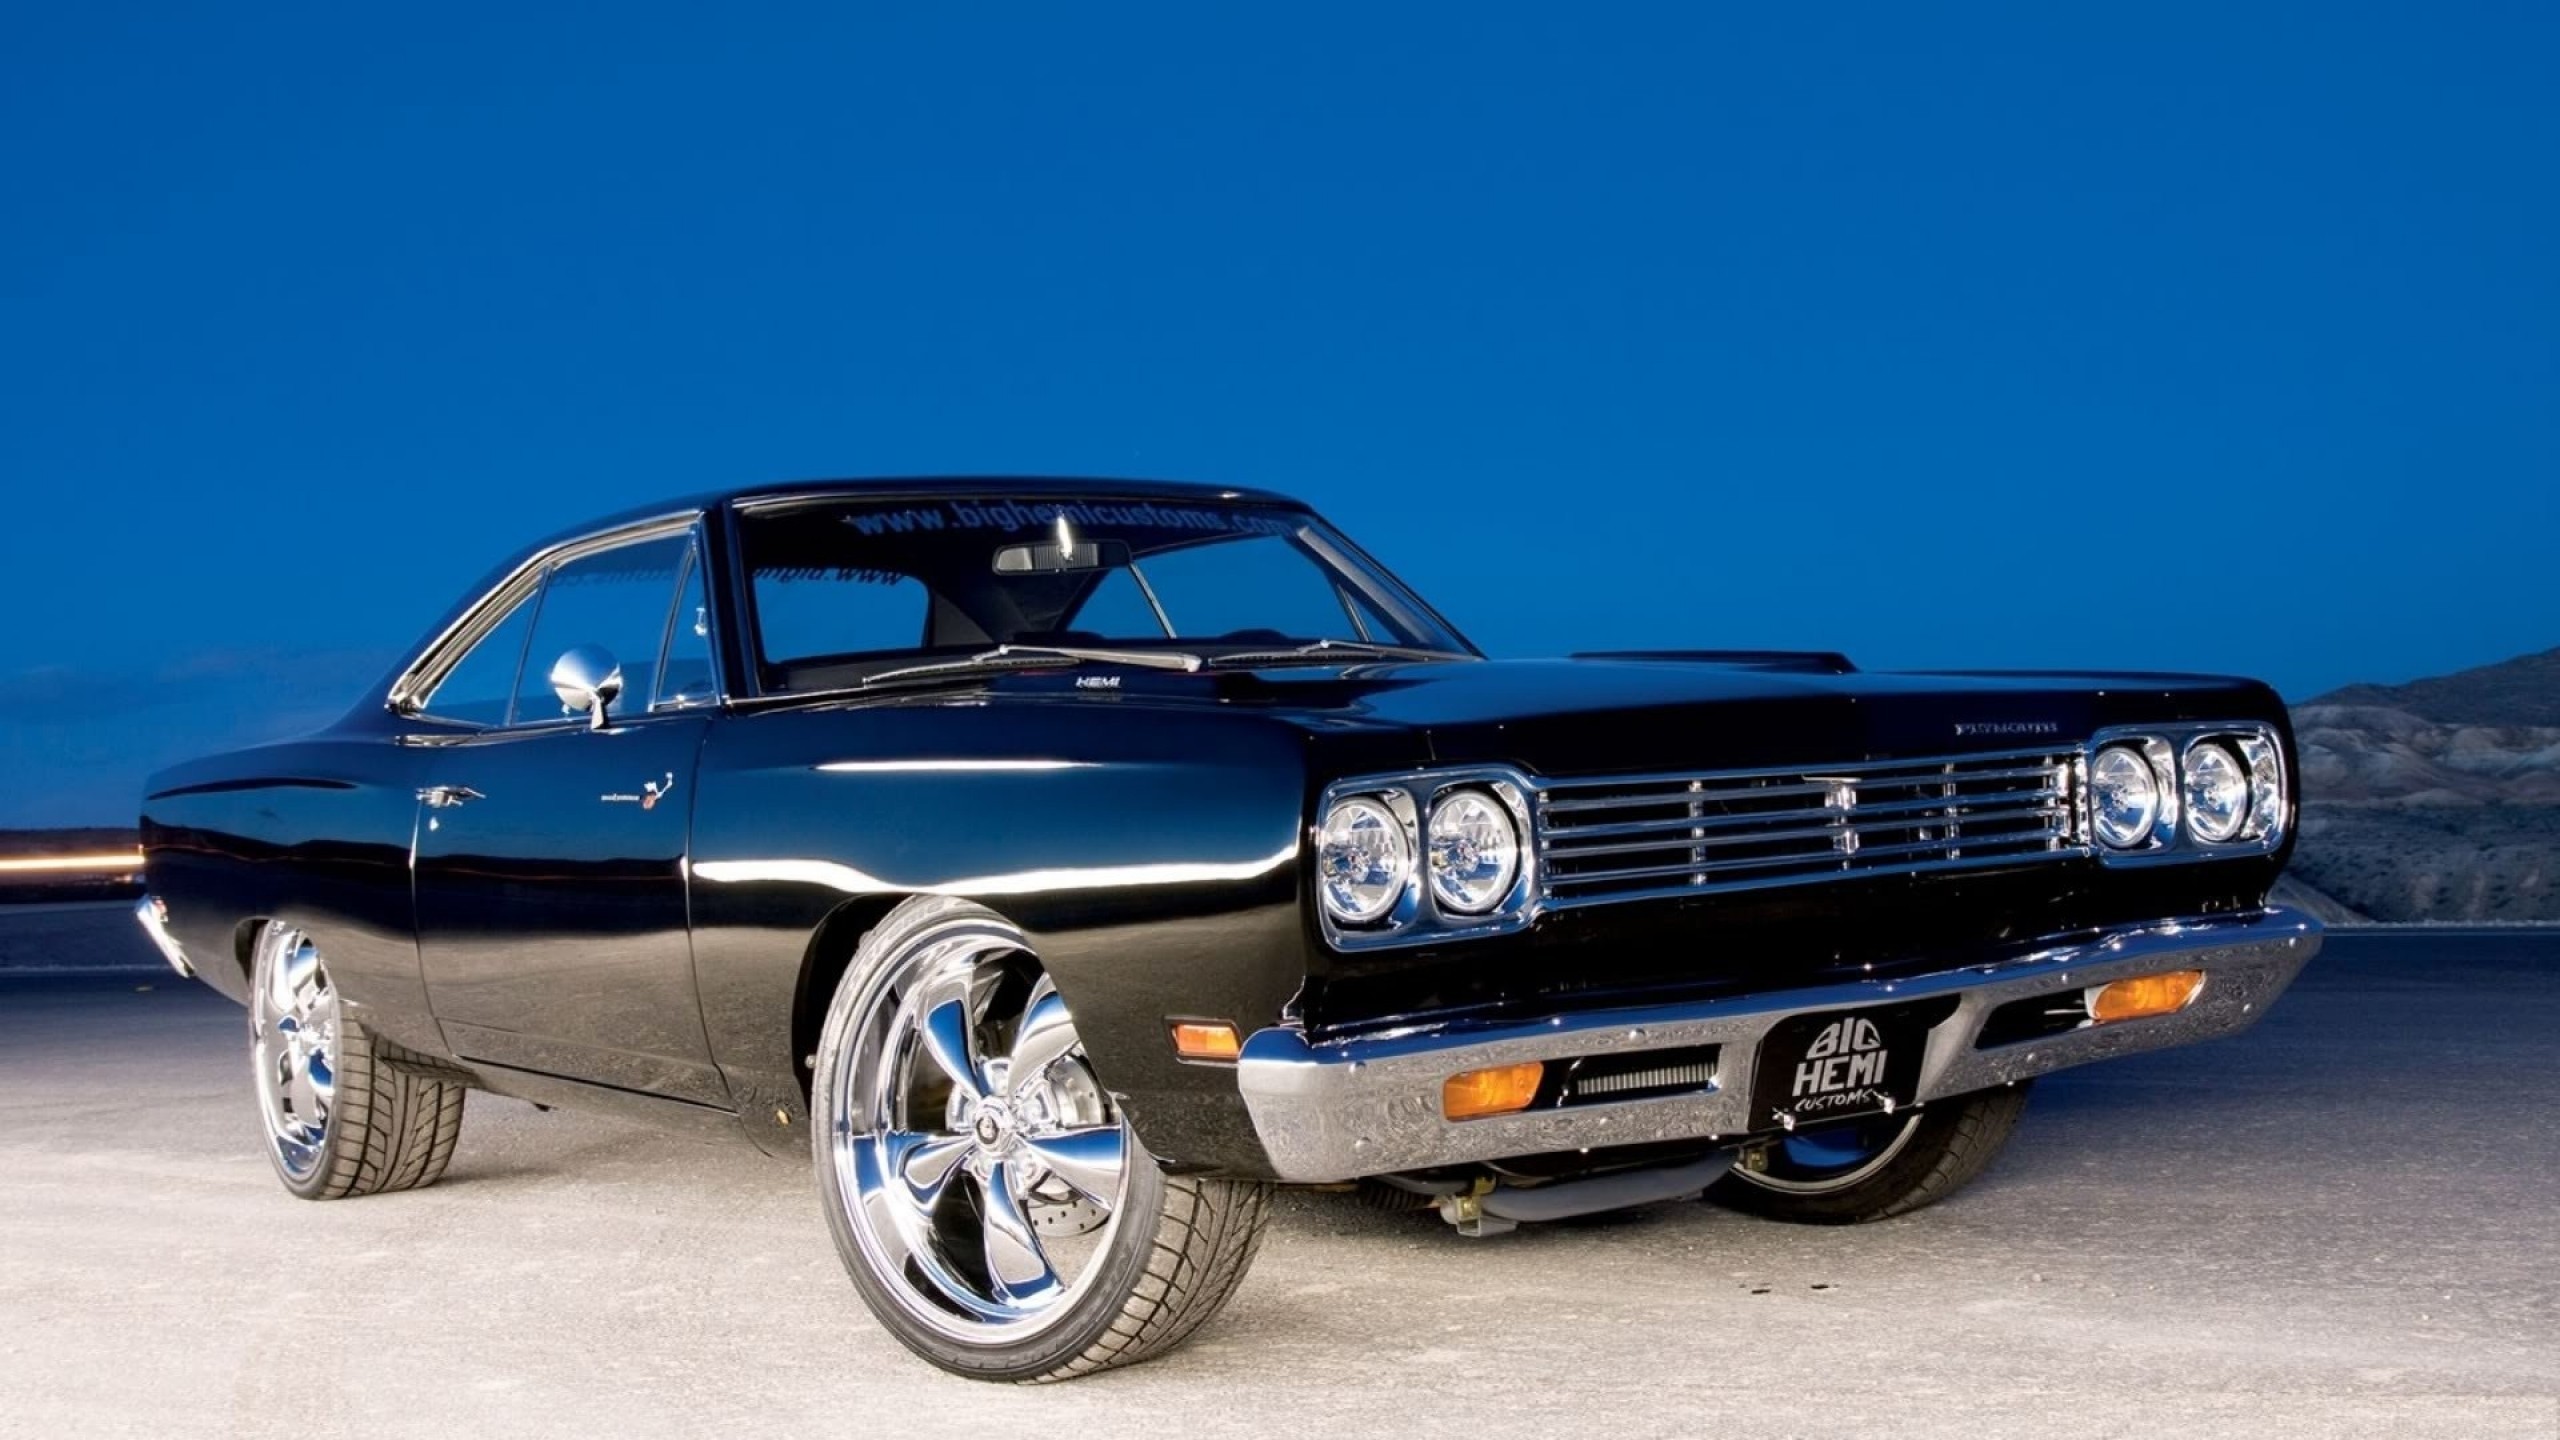 General 2560x1440 car black cars vehicle Plymouth muscle cars American cars